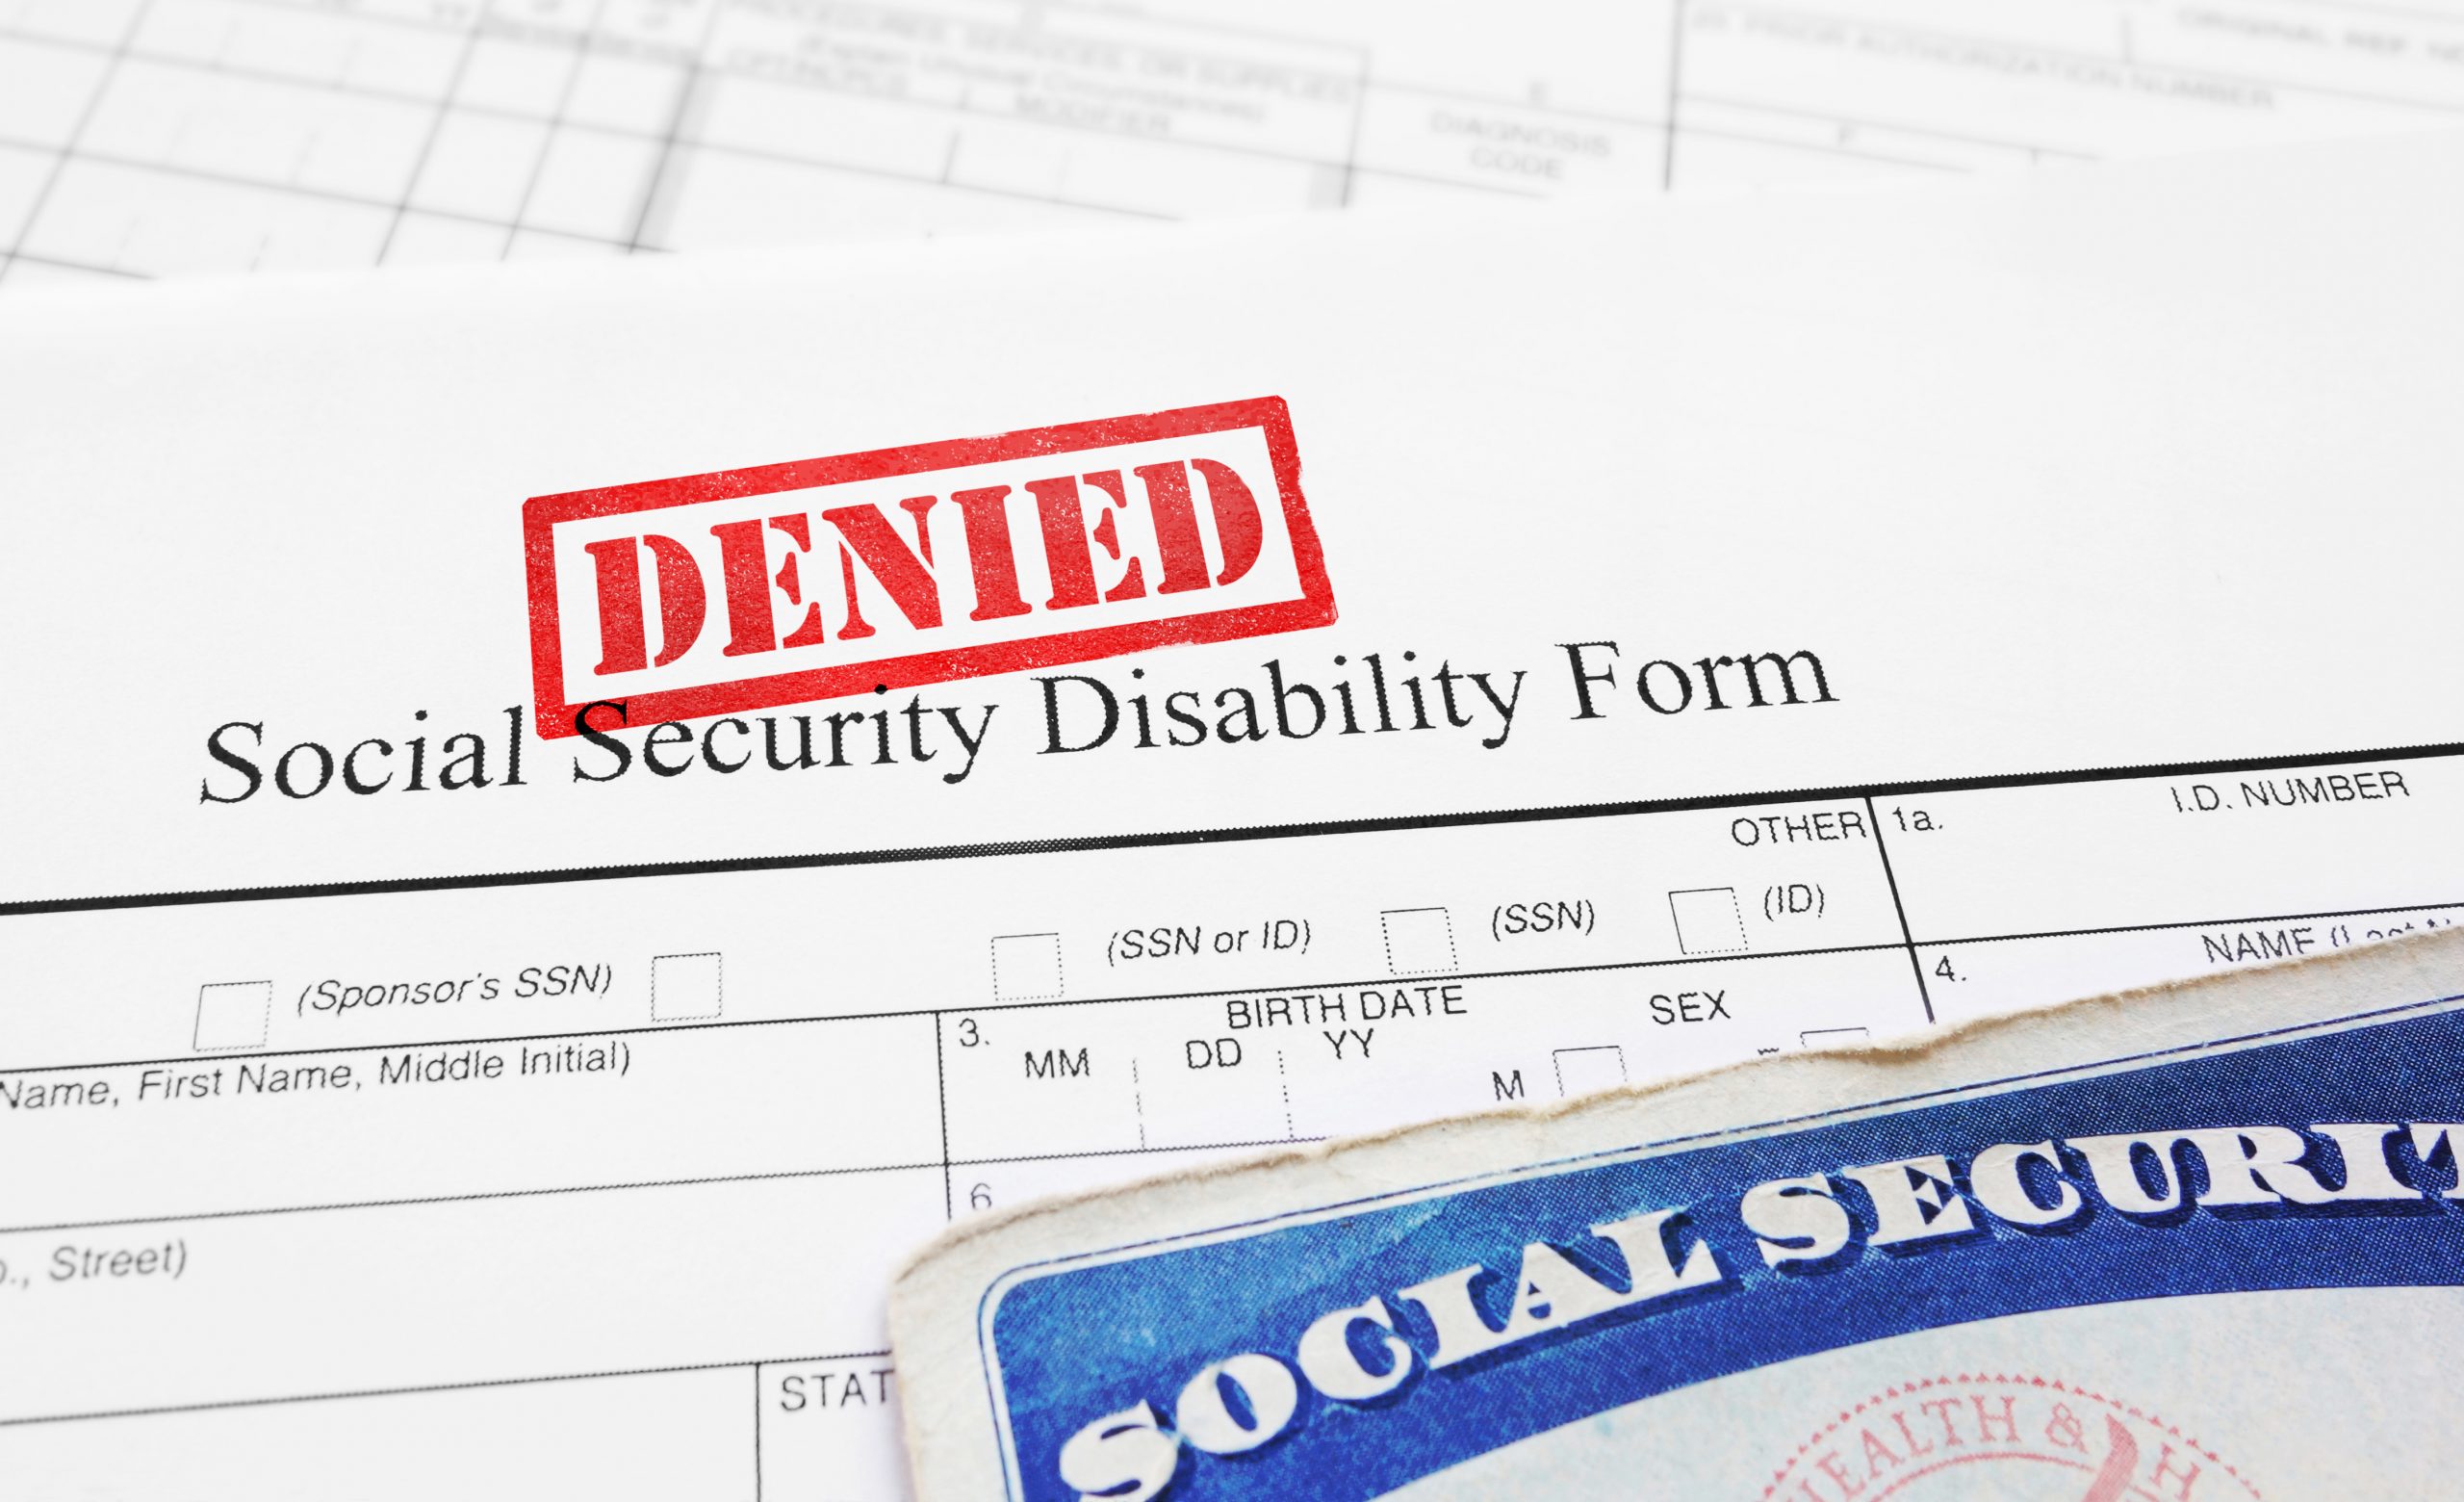 Call A+ Rated Disability Denial Appeal Lawyer Donald Peters to win your SSD SSDI SSI Disability Appeal.